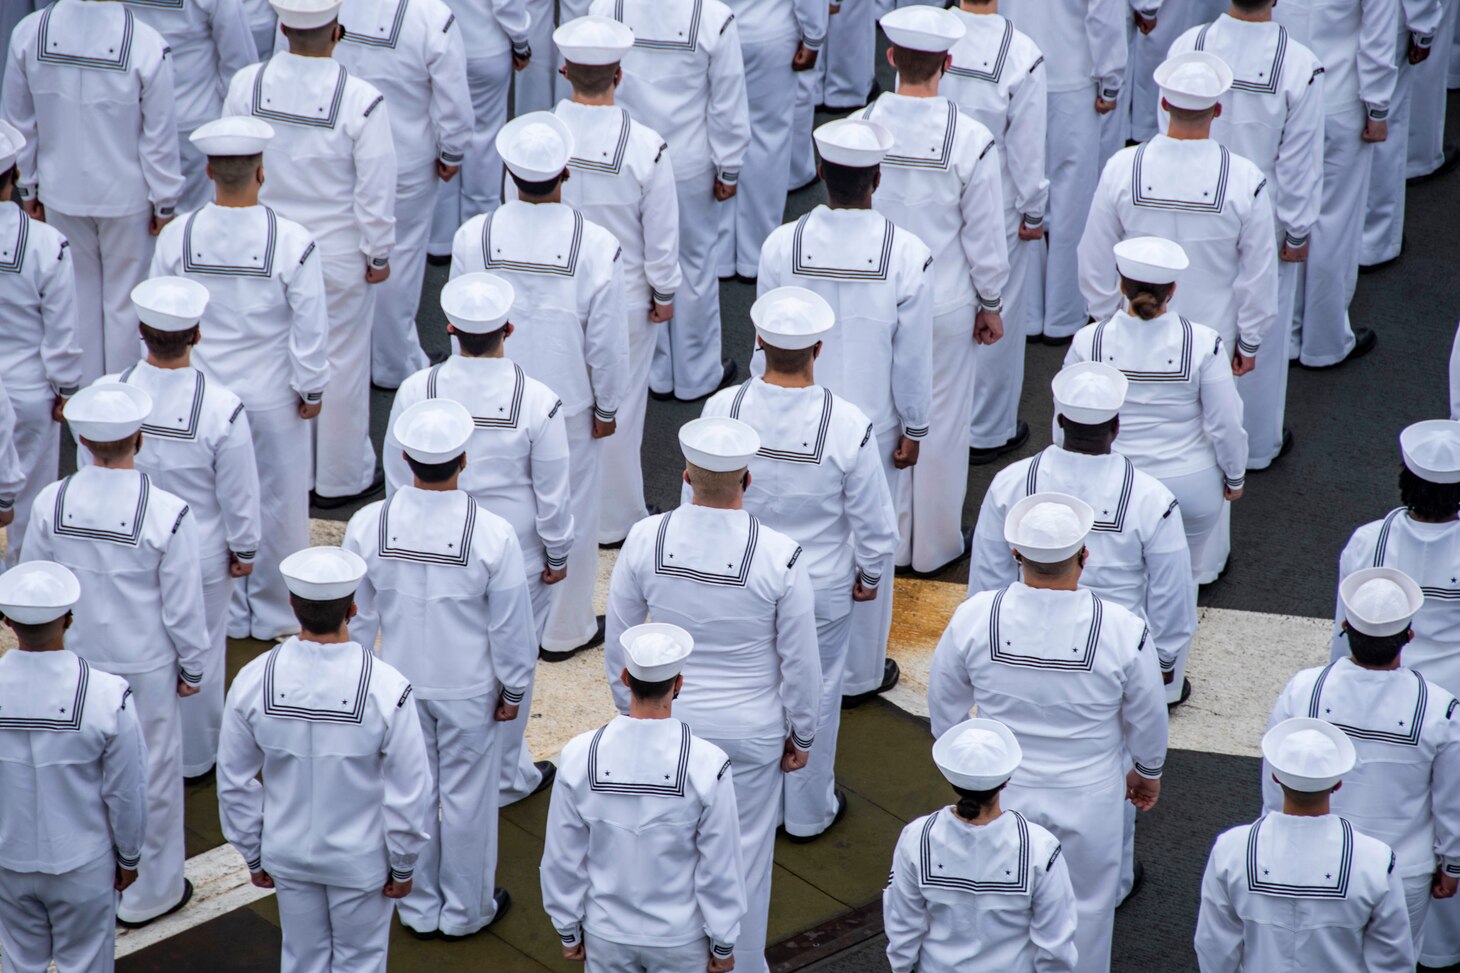 210519-N-WS494-1026 YOKOSUKA, Japan (May 19, 2021) Sailors prepare to man the rails on the flight deck of the U.S. Navy’s only forward-deployed aircraft carrier USS Ronald Reagan (CVN 76) as it departs Commander, Fleet Activities Yokosuka, Japan. Ronald Reagan, the flagship of Carrier Strike Group Five, provides a combat-ready force that protects and defends the United States, as well as the collective maritime interests of its allies and partners in the Indo-Pacific region. (U.S. Navy photo by Mass Communication Specialist 3rd Class Quinton A. Lee)